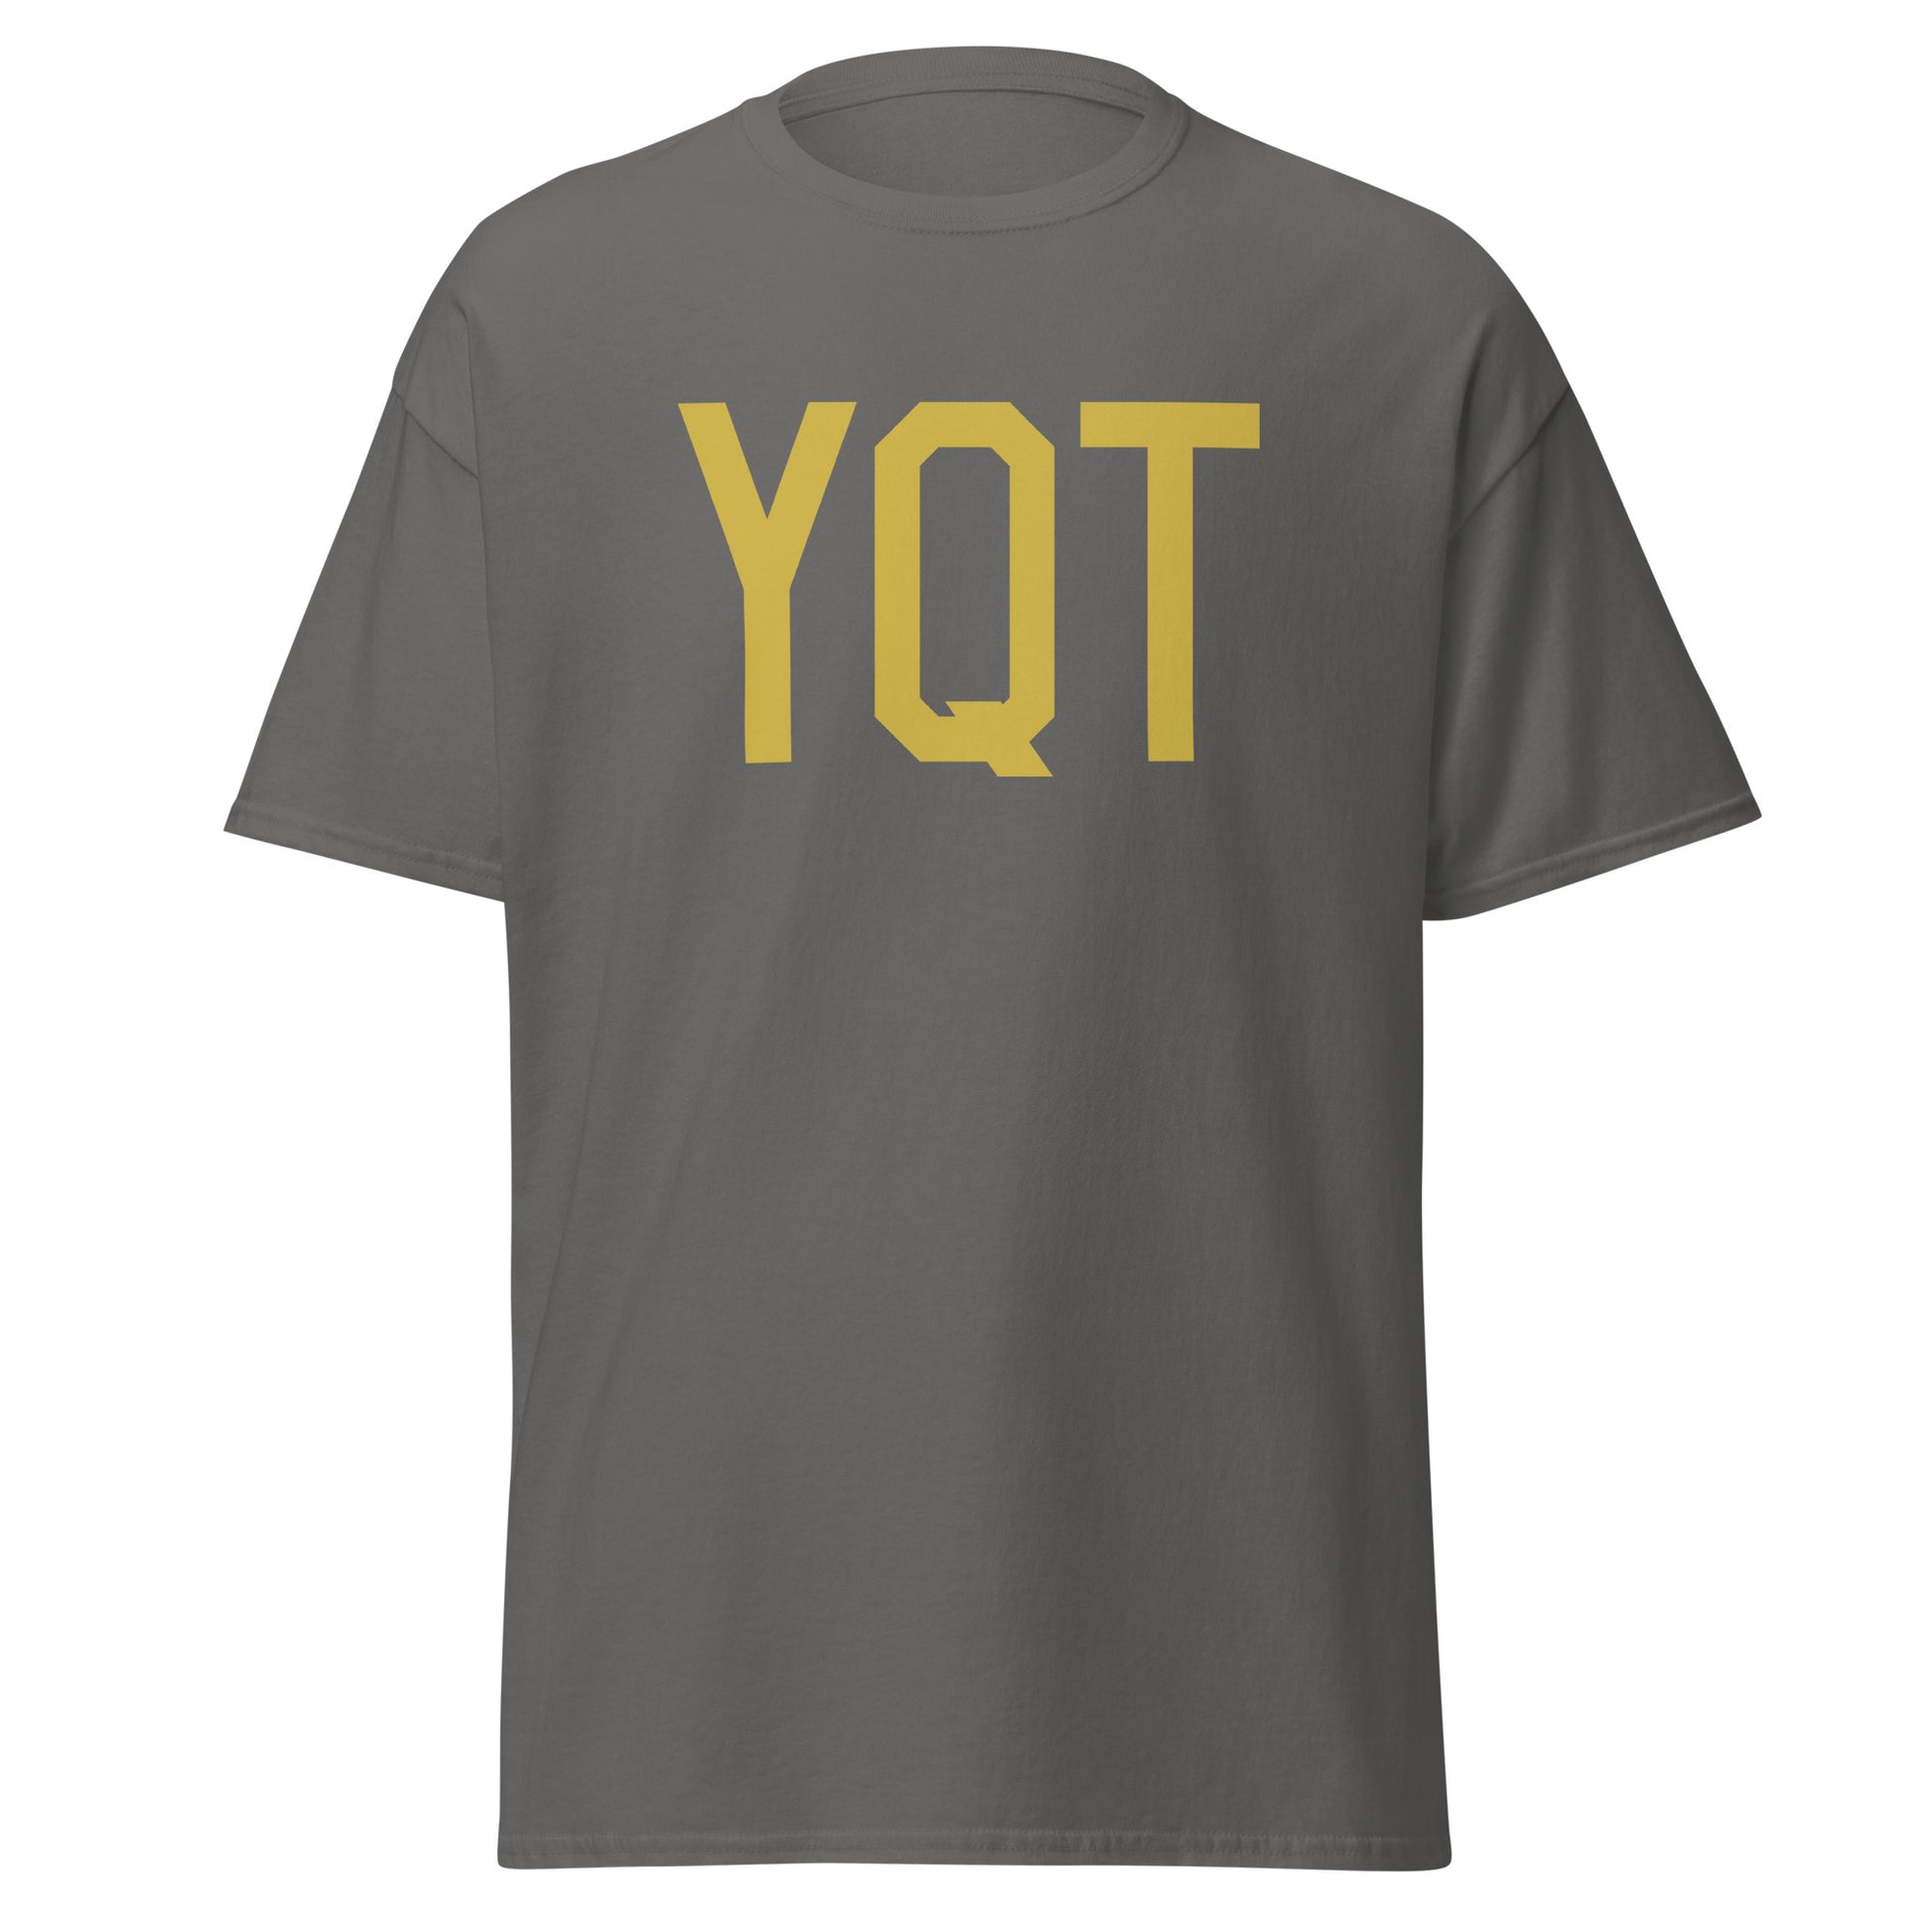 Aviation Enthusiast Men's Tee - Old Gold Graphic • YQT Thunder Bay • YHM Designs - Image 05